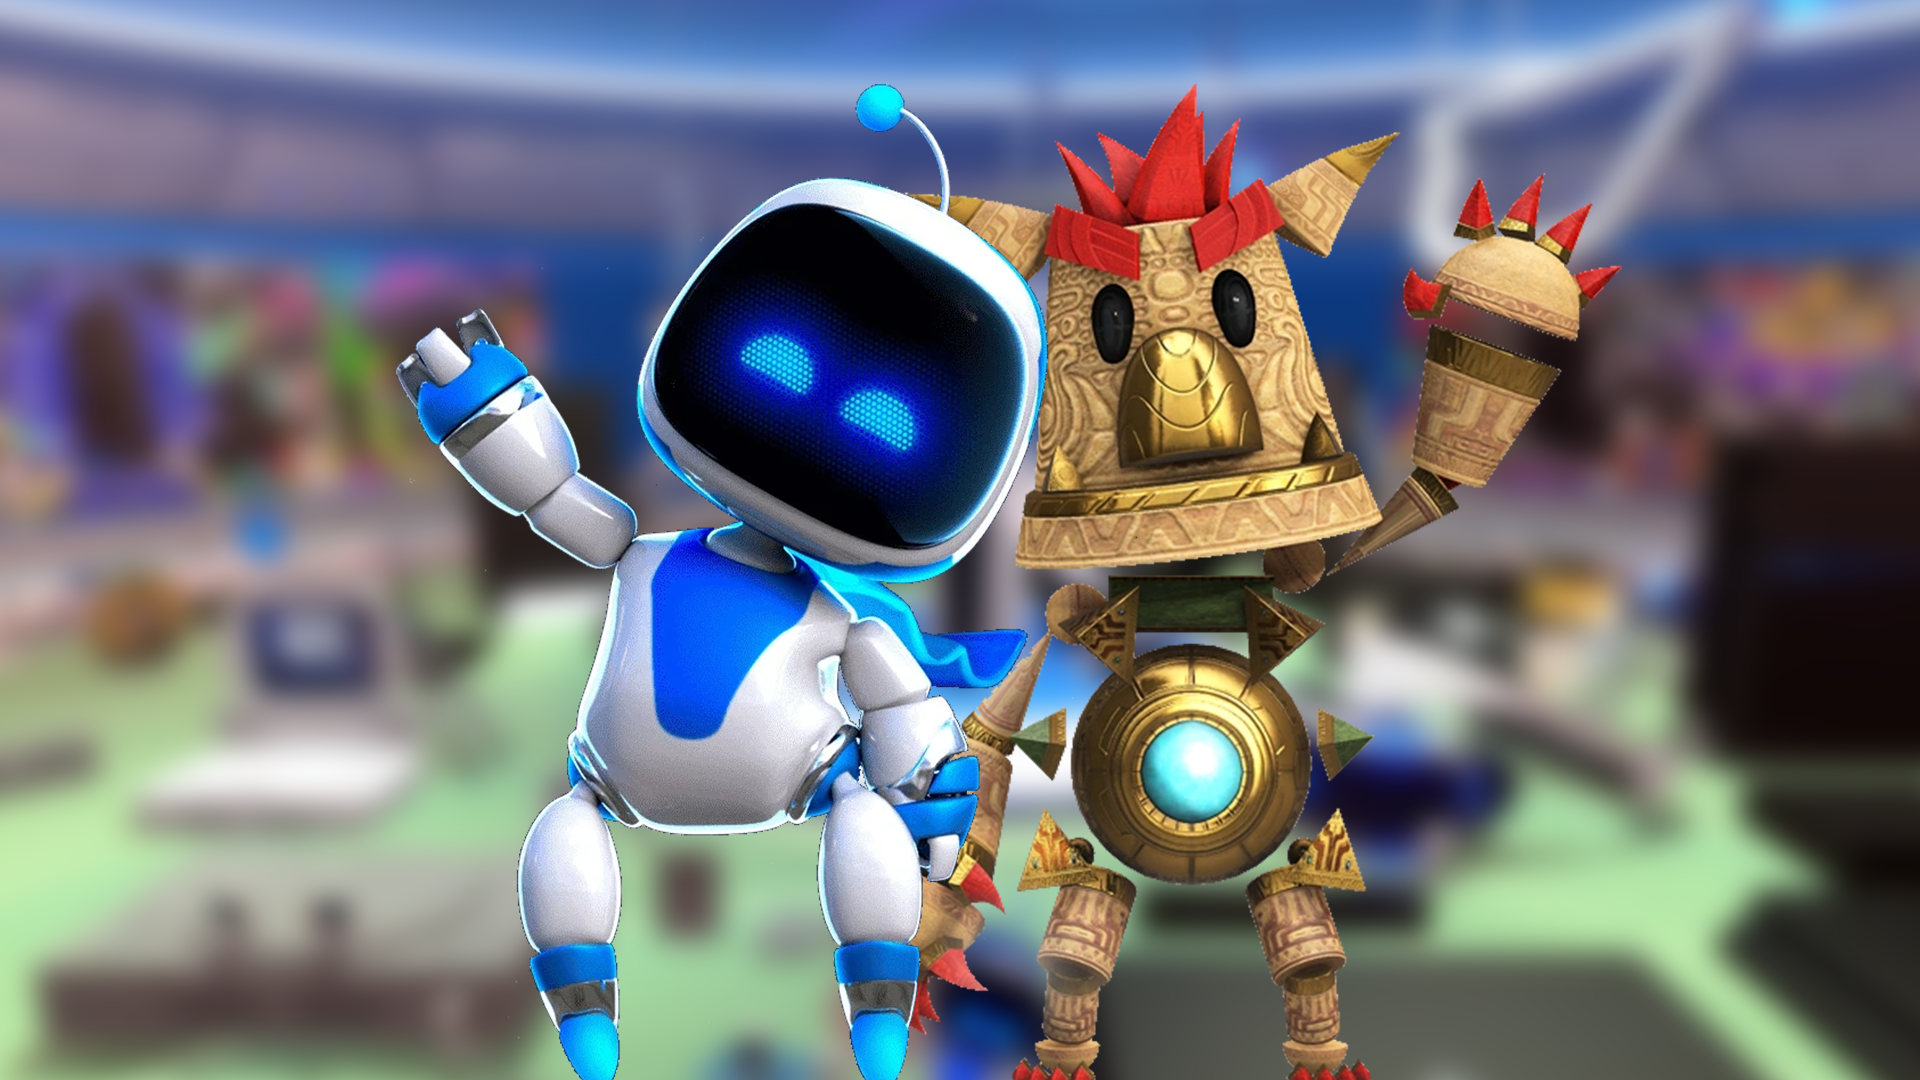 Astro and Knack